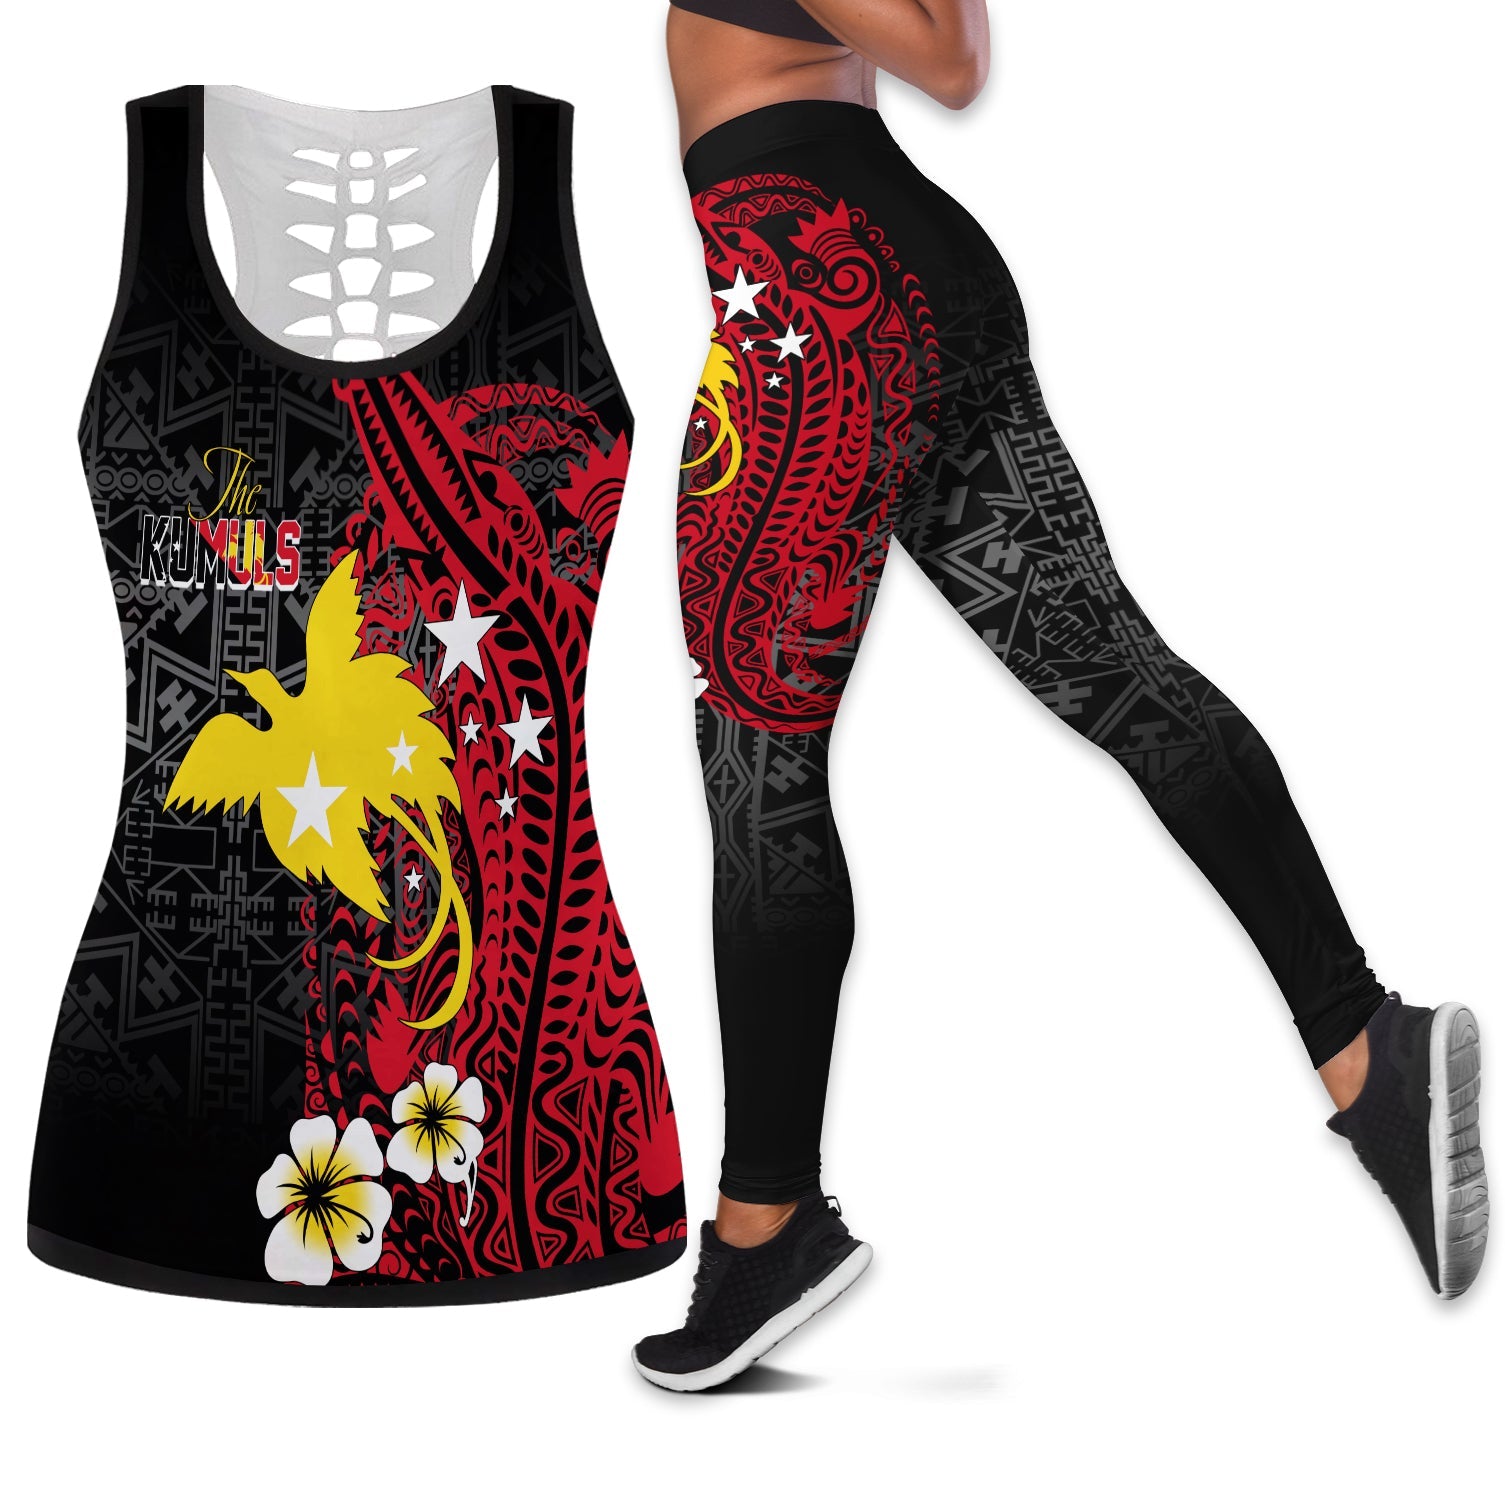 Papua New Guinea Independence Hollow Tank and Leggings Combo PNG Kumuls - Tribal Crocodile LT7 Black - Polynesian Pride